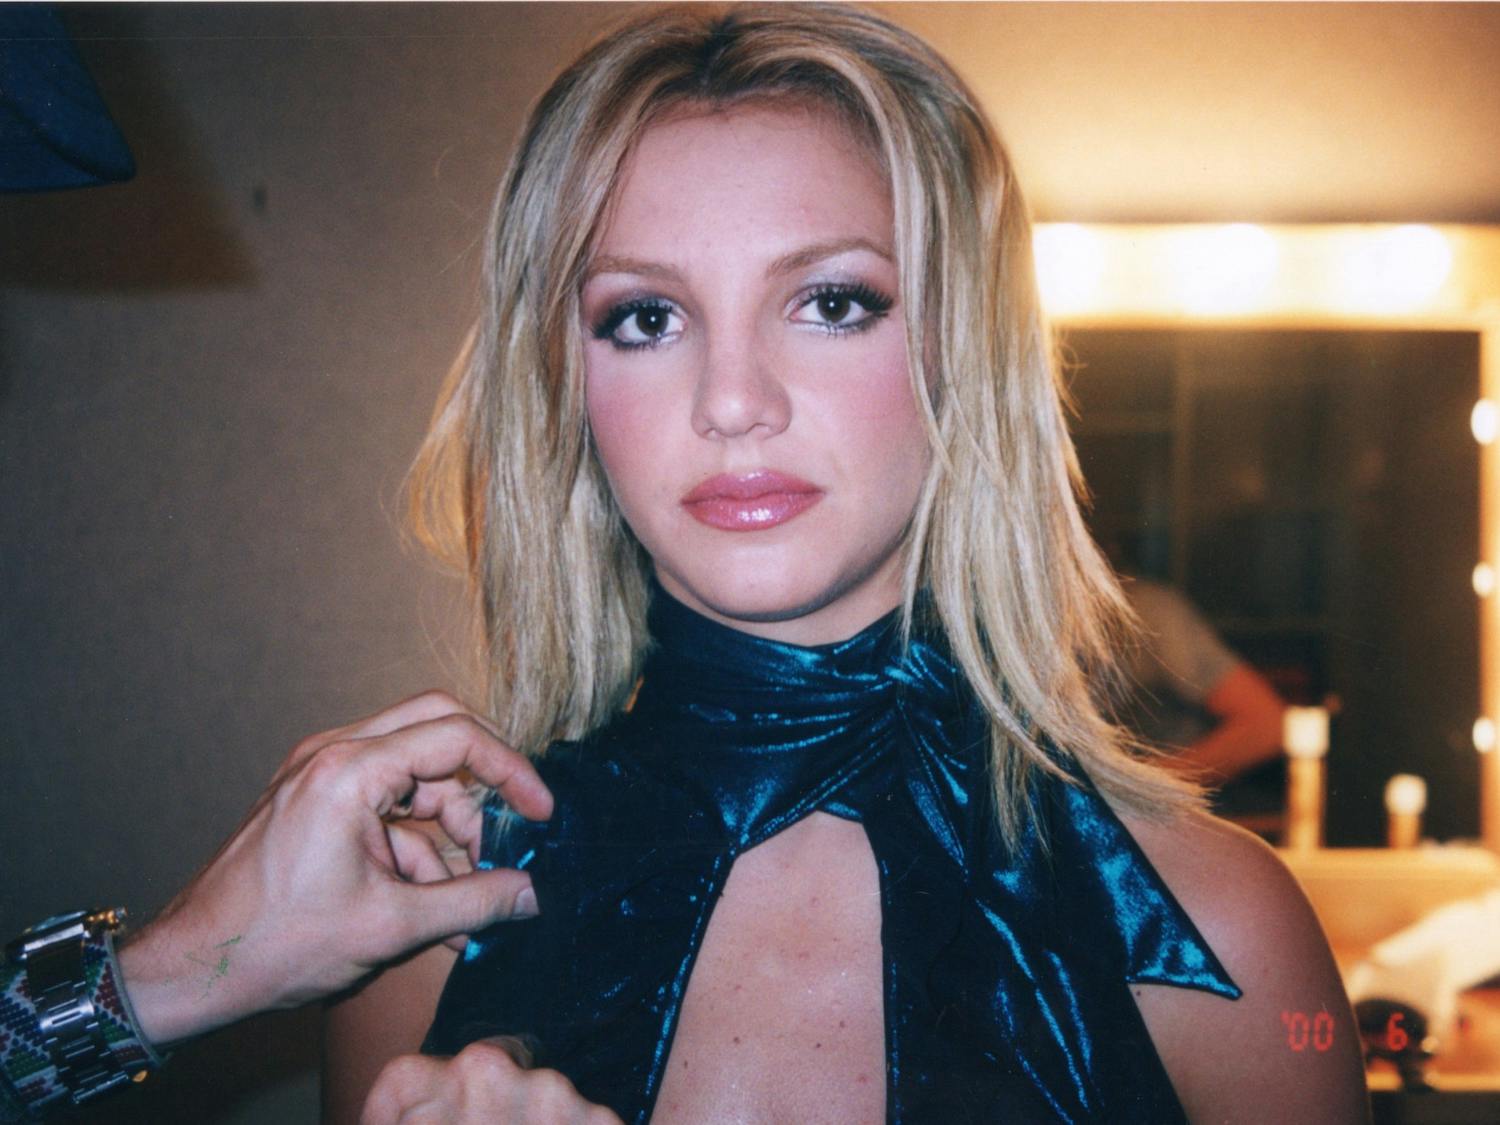 Behind the scenes during the shoot for the “Lucky” music video in 2000, a moment captured by Britney Spears’ assistant and friend Felicia Culotta. (Photo courtesy of FX/TNS)